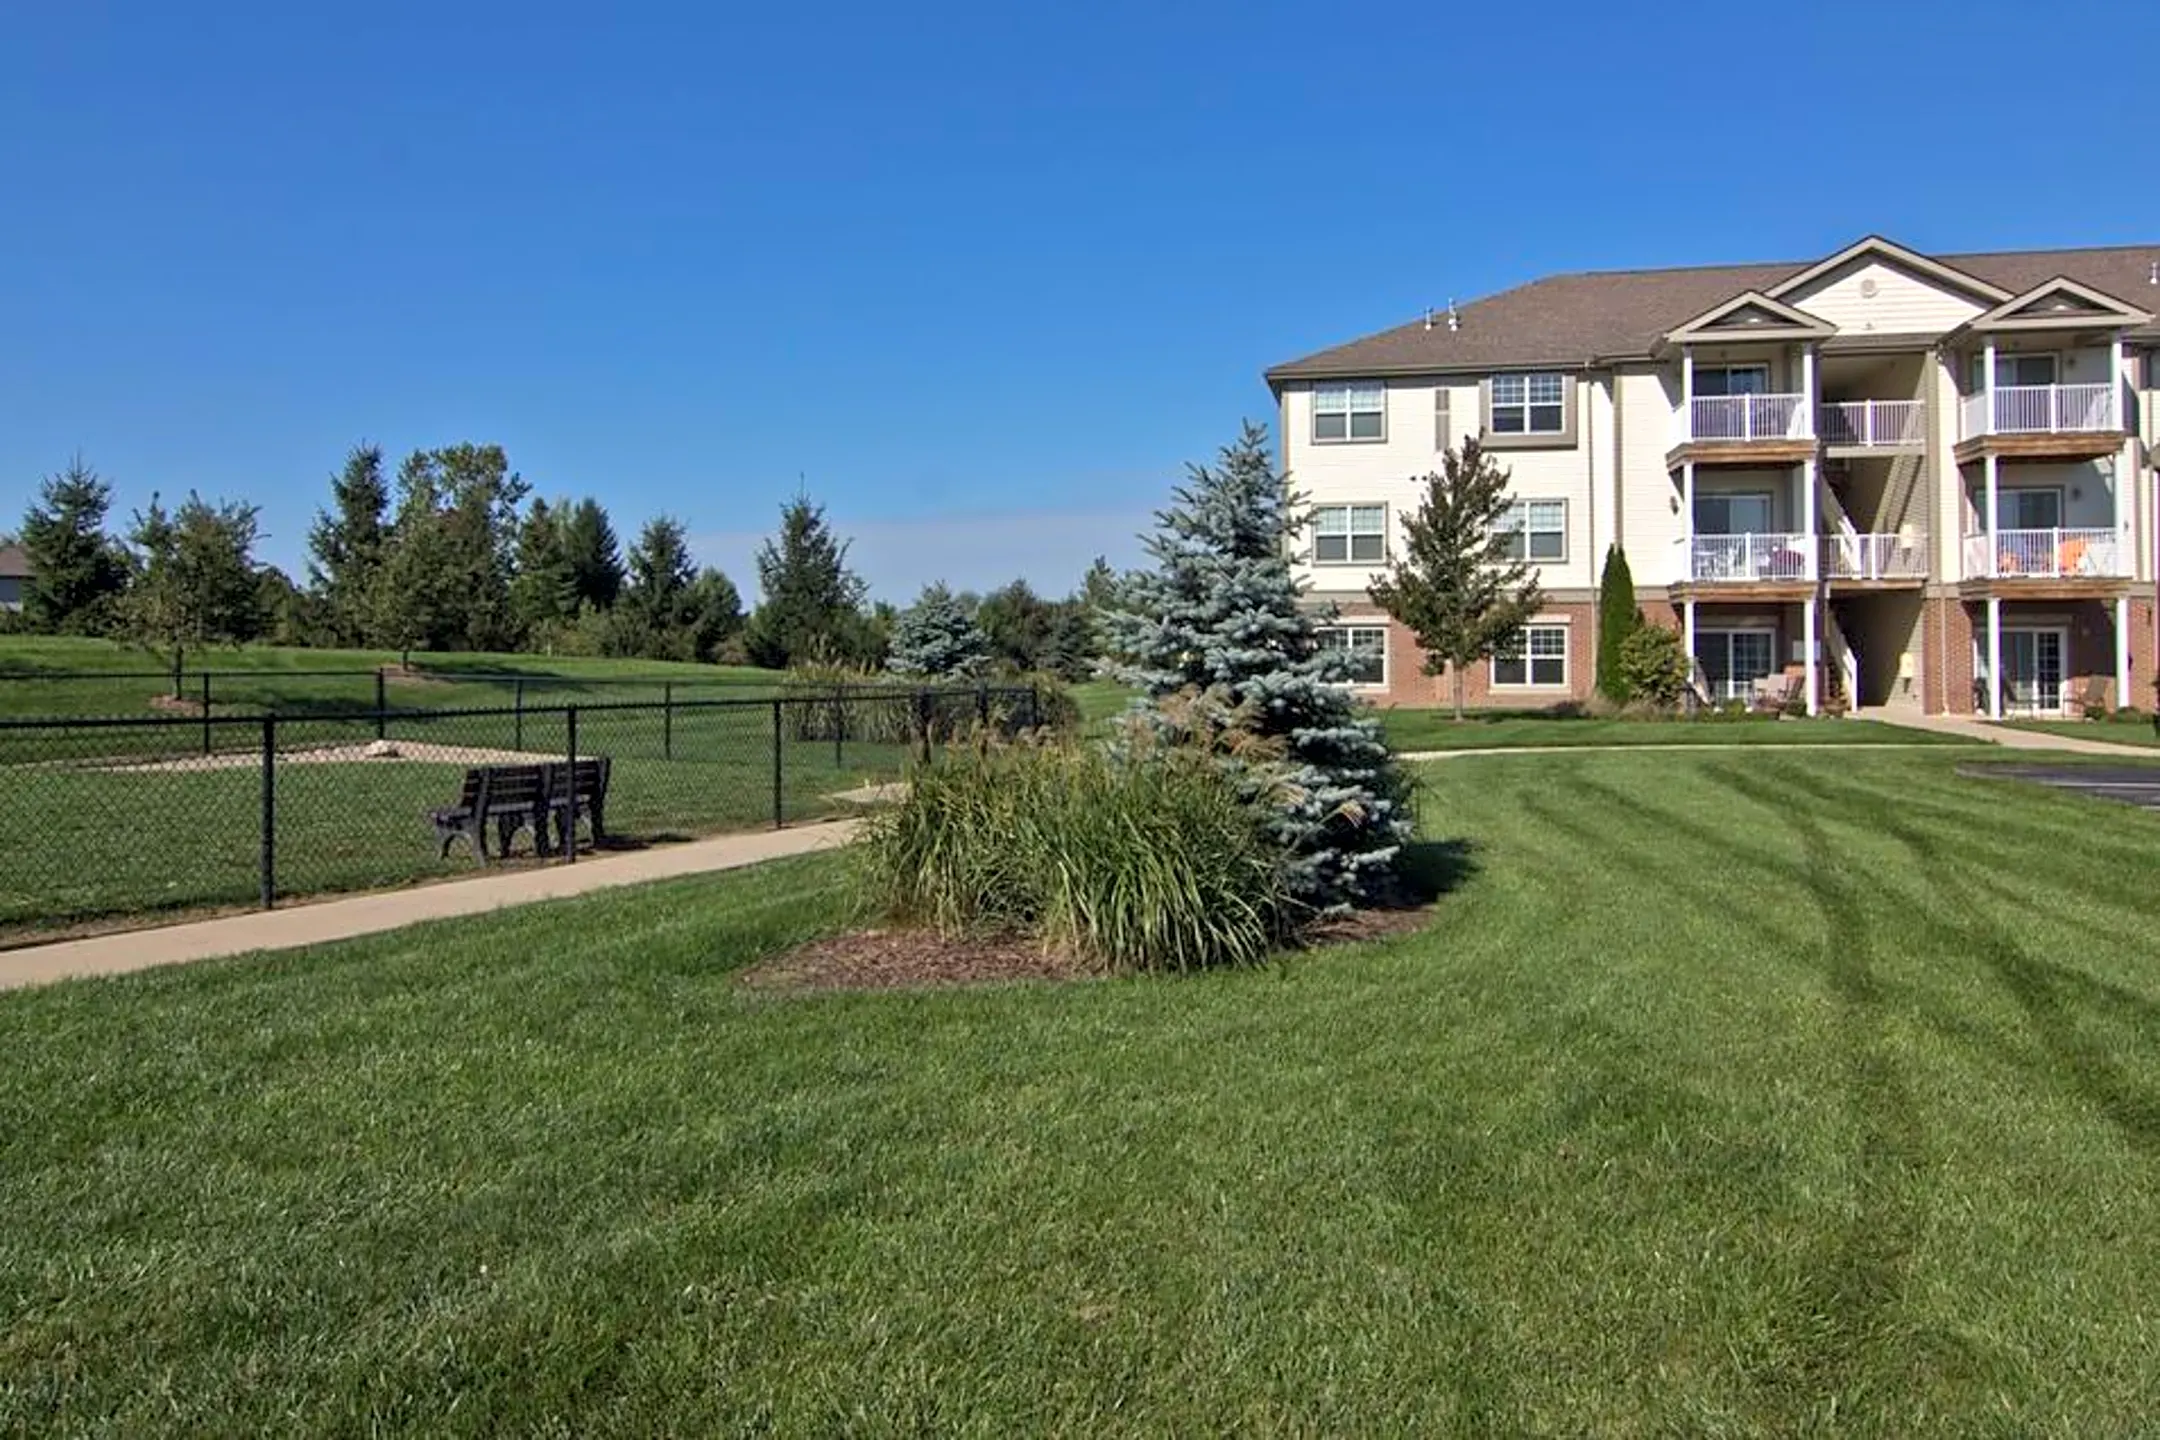 Building - The Residences at Carronade - Perrysburg, OH